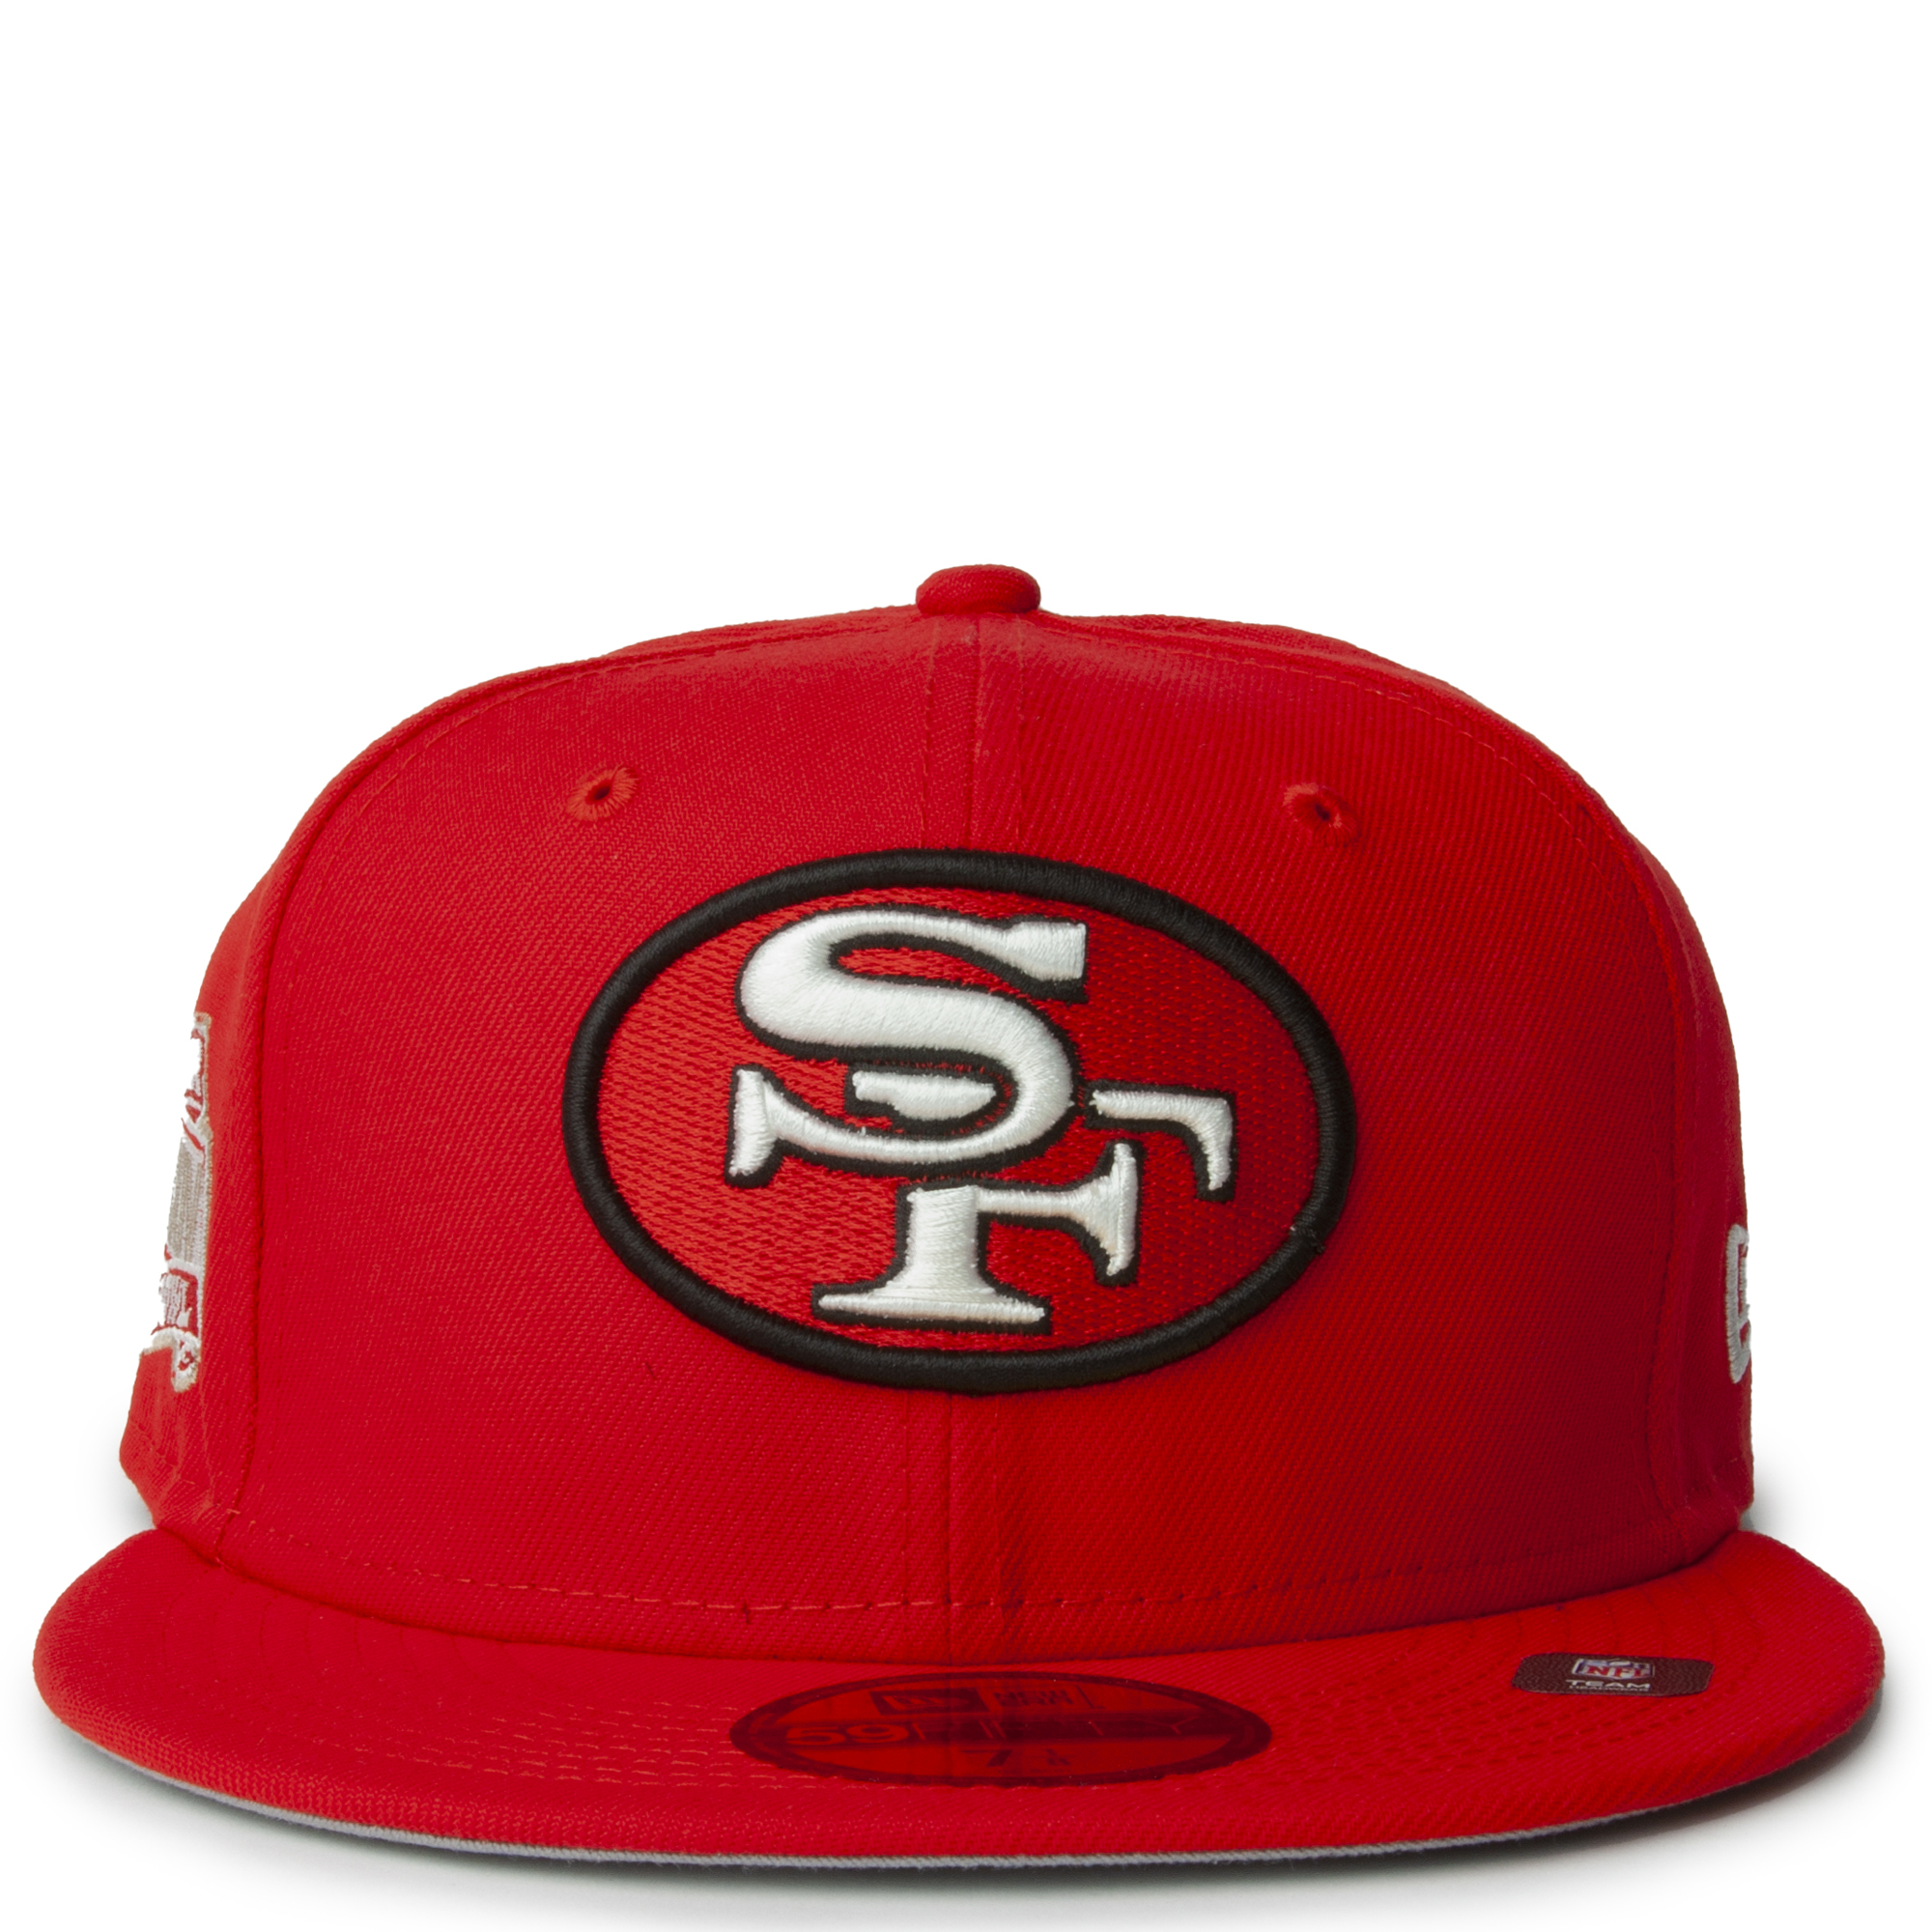 red and gold 49ers hat